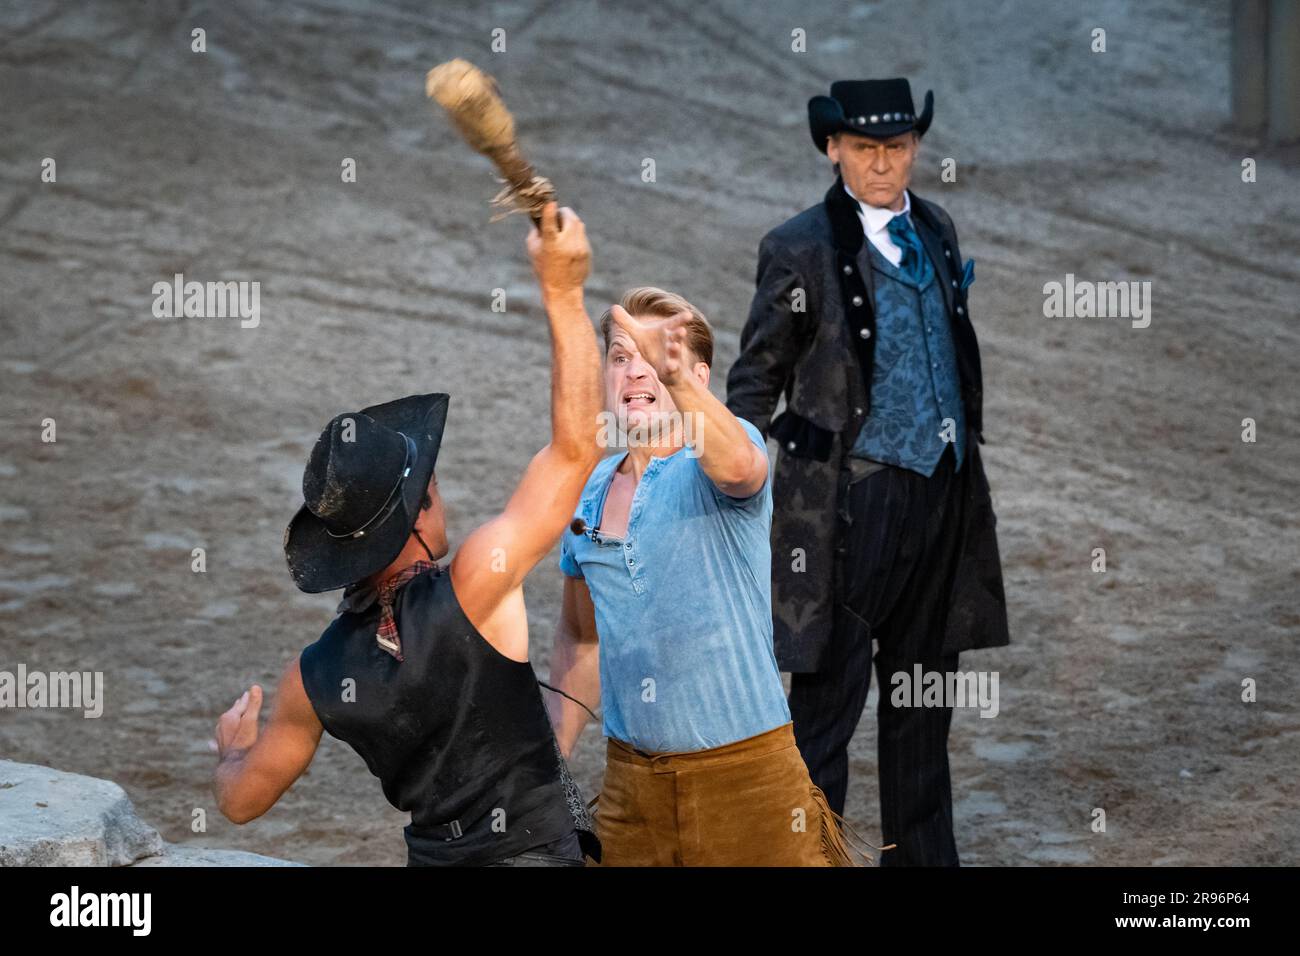 Bad Segeberg, Germany. 24th June, 2023. Bastian Semm as Old Shatterhand (l-r) fights with an extra while Wolfgang Bahro as Santer watches in the background in the premiere 'Winnetou I - Blood Brothers' of the 70th season of the Karl May Games in Bad Segeberg. Since 1952, Karl May's adventure novels have been brought to the stage in Bad Segeberg's Kalkberg Stadium - this year it's 'Winnetou I: Blood Brothers'. Credit: Jonas Walzberg/dpa/Alamy Live News Stock Photo